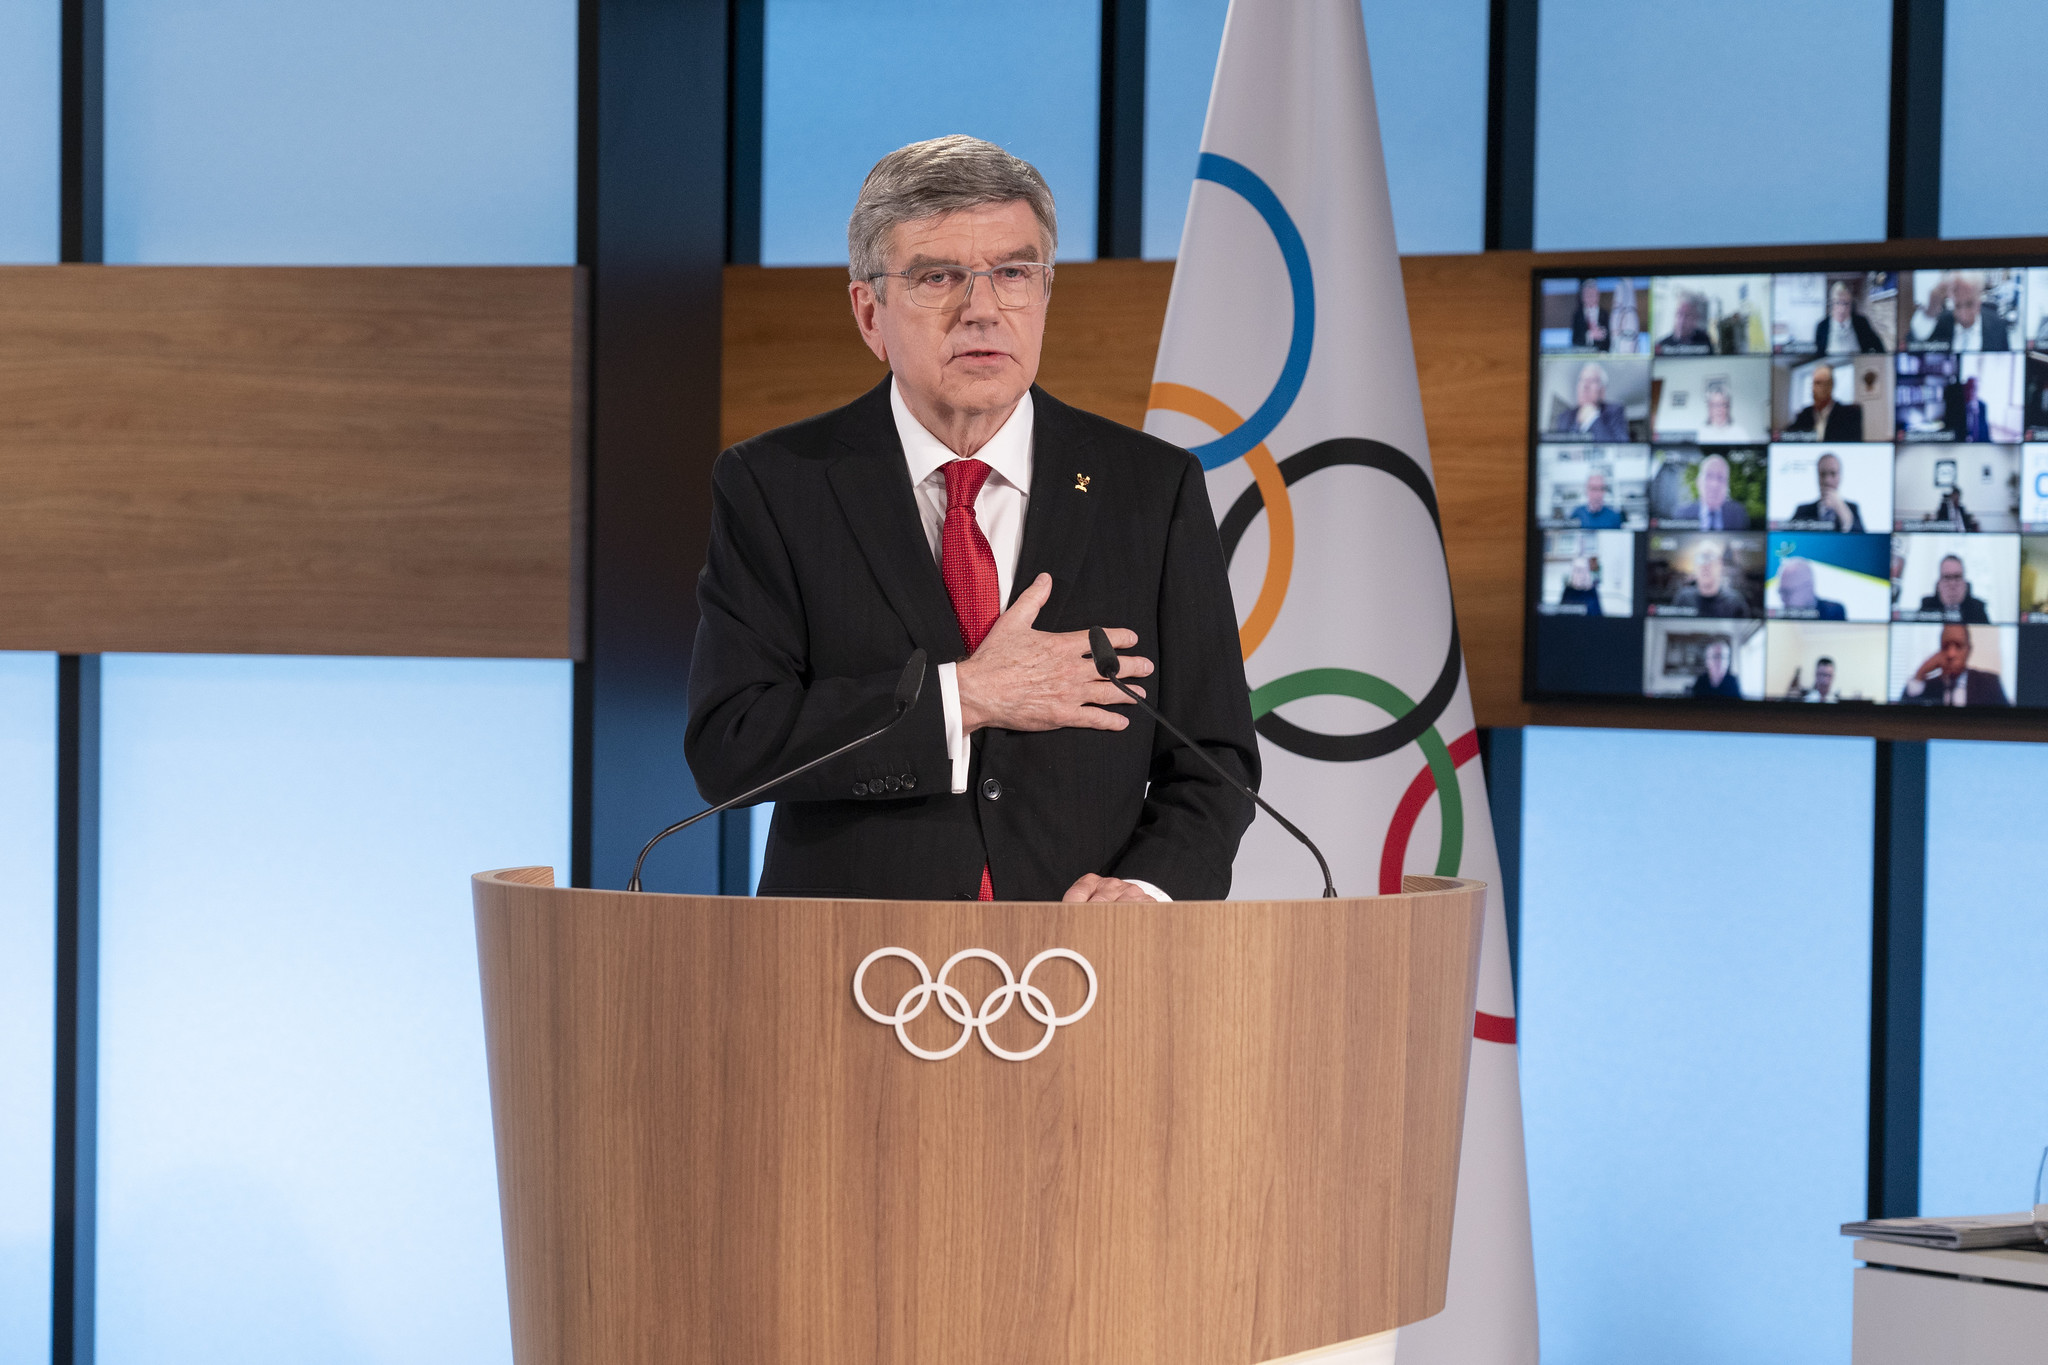 IOC President Thomas Bach, re-elected unopposed, has spoken at the 137th IOC Session of changing the Olympic motto and taking up an offer of Chinese vaccines for Games competitors ©Getty Images